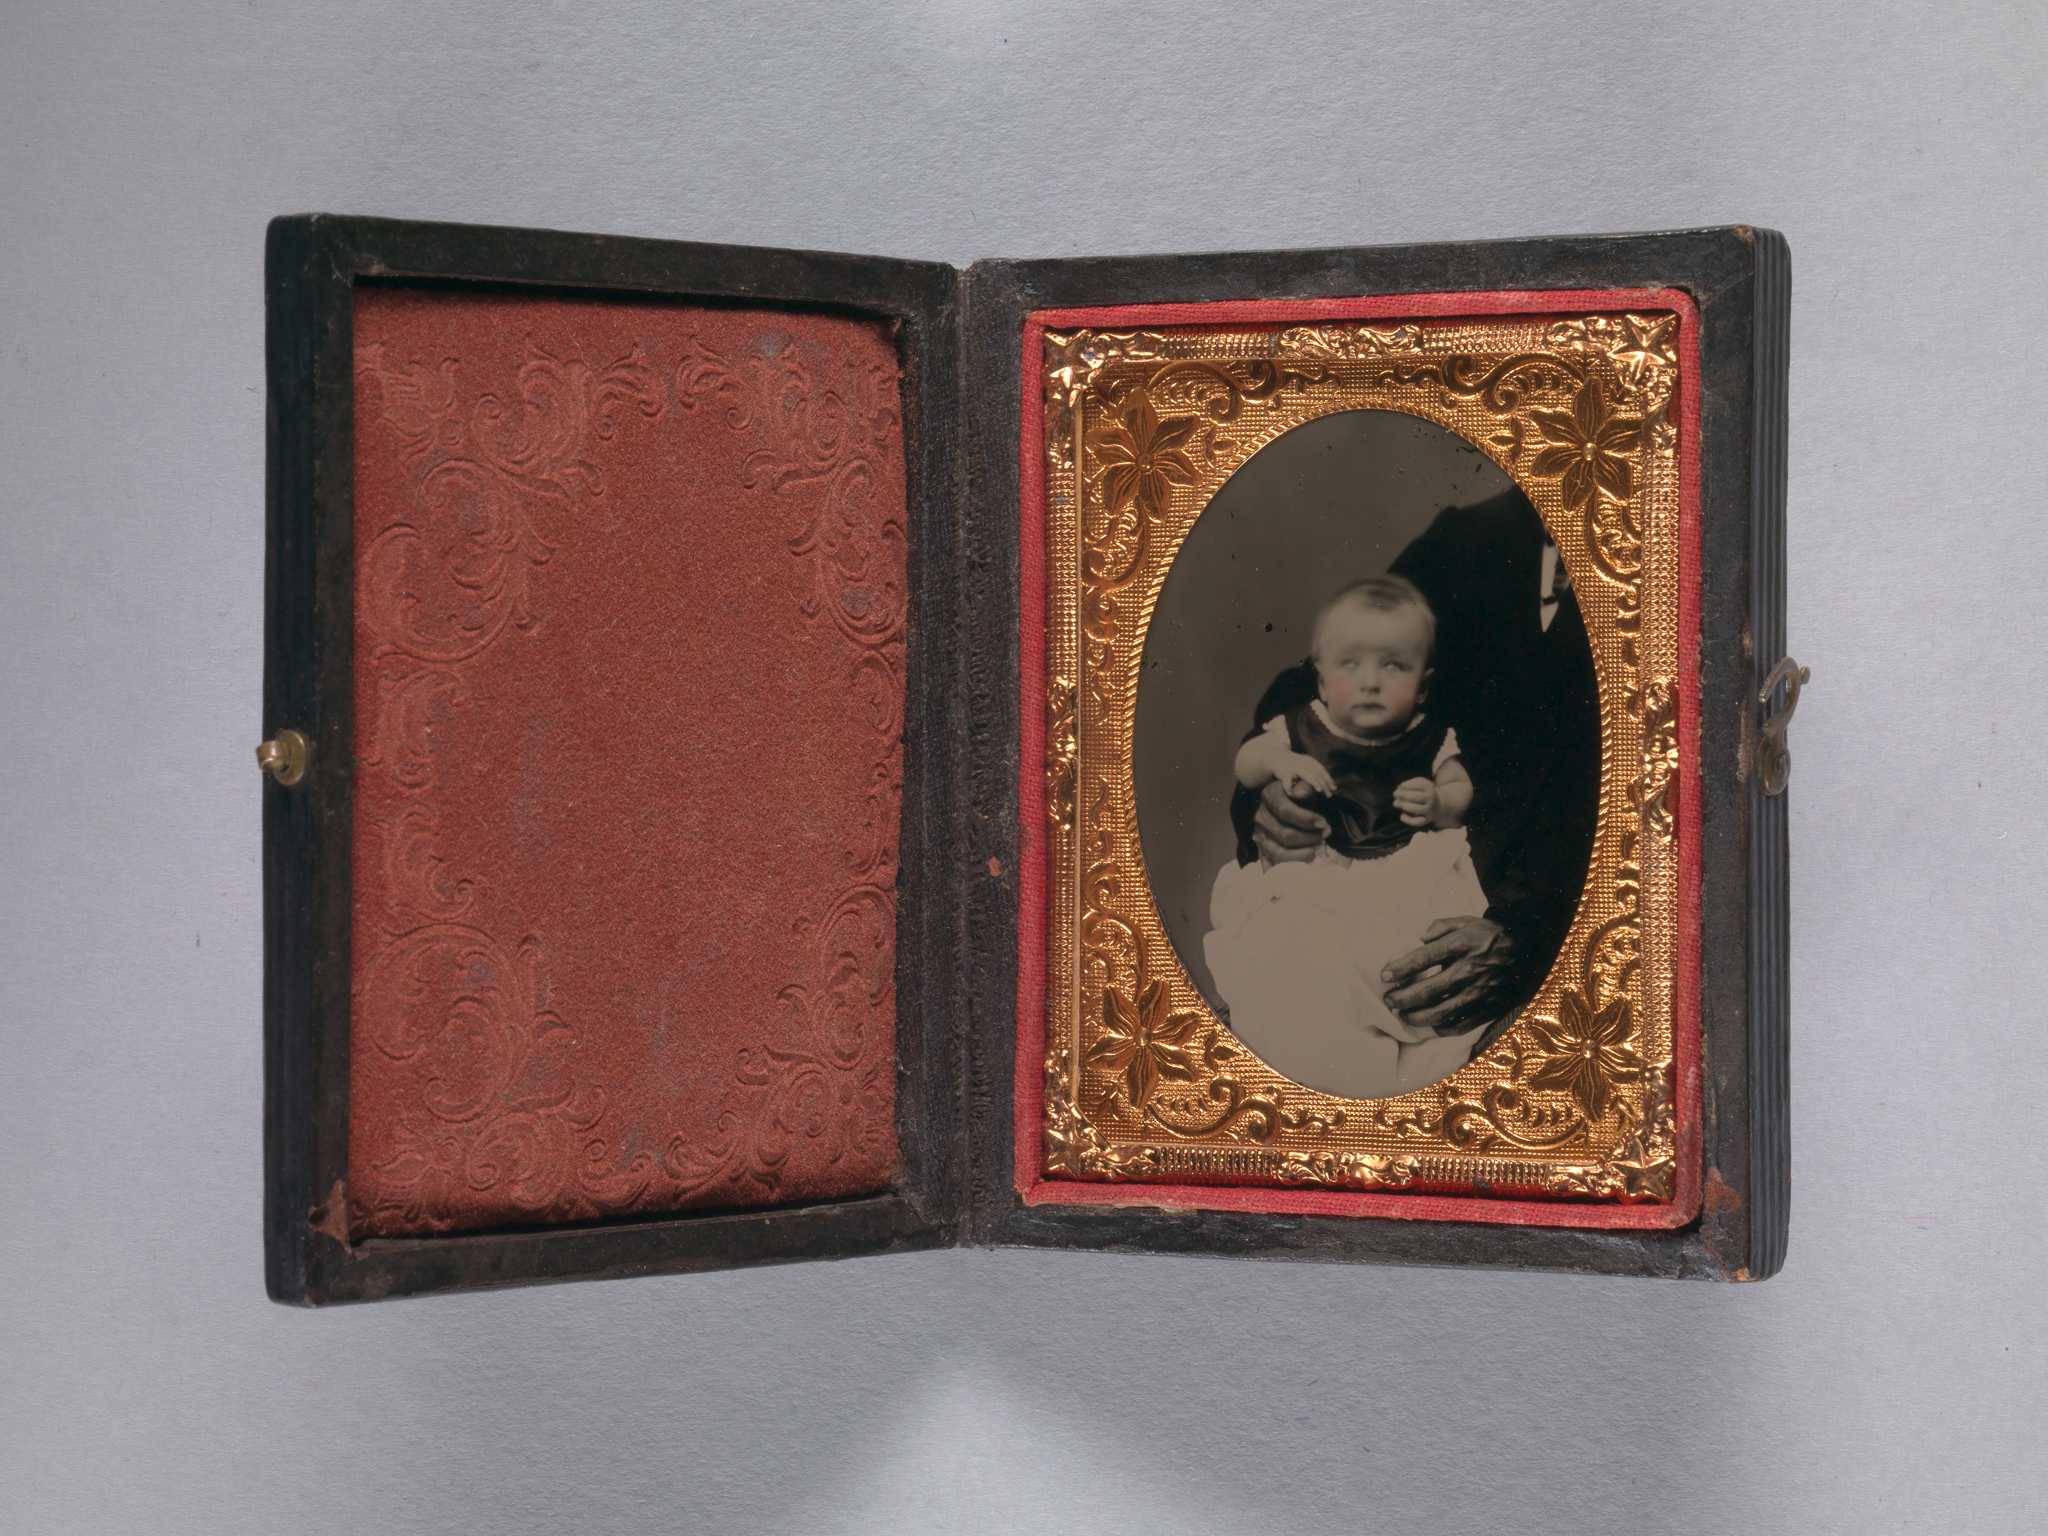 This 1/9 plate cased ambrotype depicts a white baby being held for the camera by a black man whose shoulder and hands are visible, but is otherwise unseen. The baby's cheeks have been tinted pink. The photograph is in a decorative copper-colored metal oval frame with a floral, star, and scroll motif and is held in a brown case with red textile lining. There are decorative impressions on the front and back of the case, which fastens with a small metal hook and eye closure along one edge.